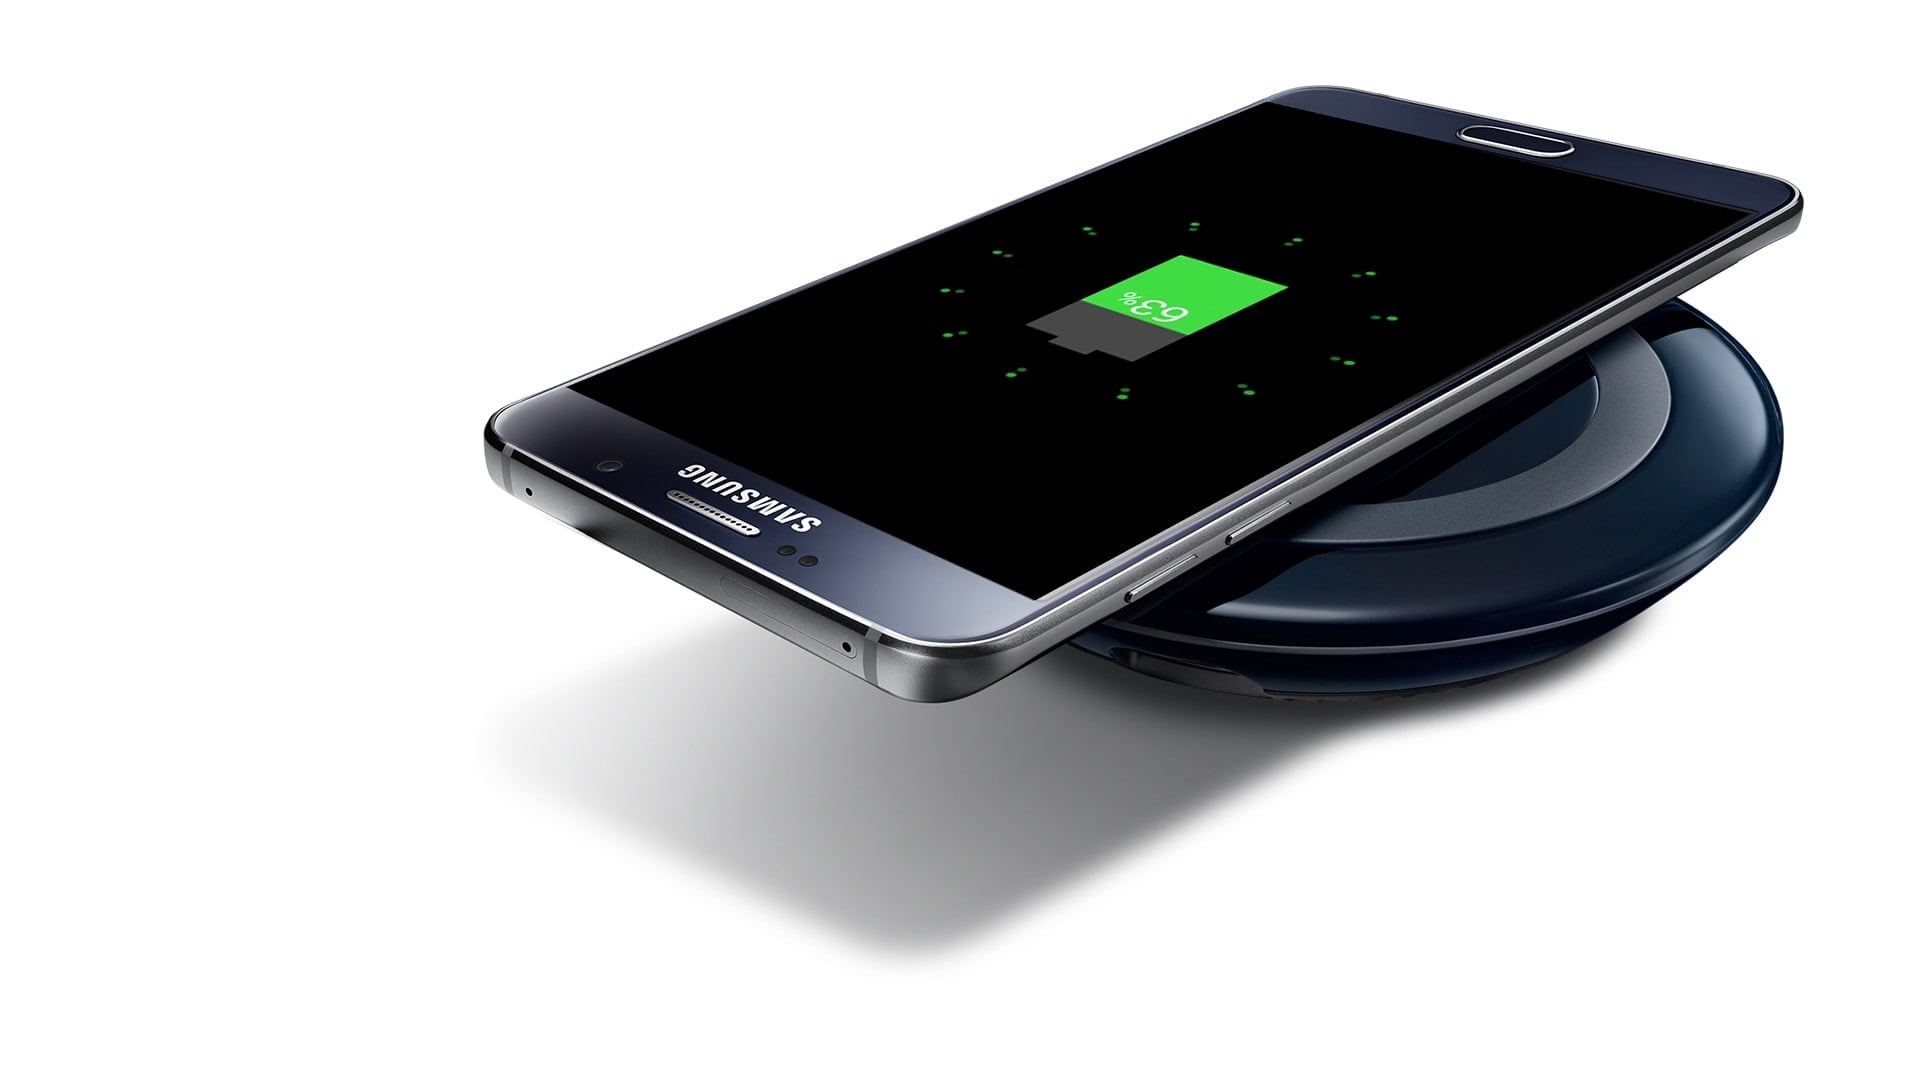 Use Wireless charging or PowerShare with Galaxy devices